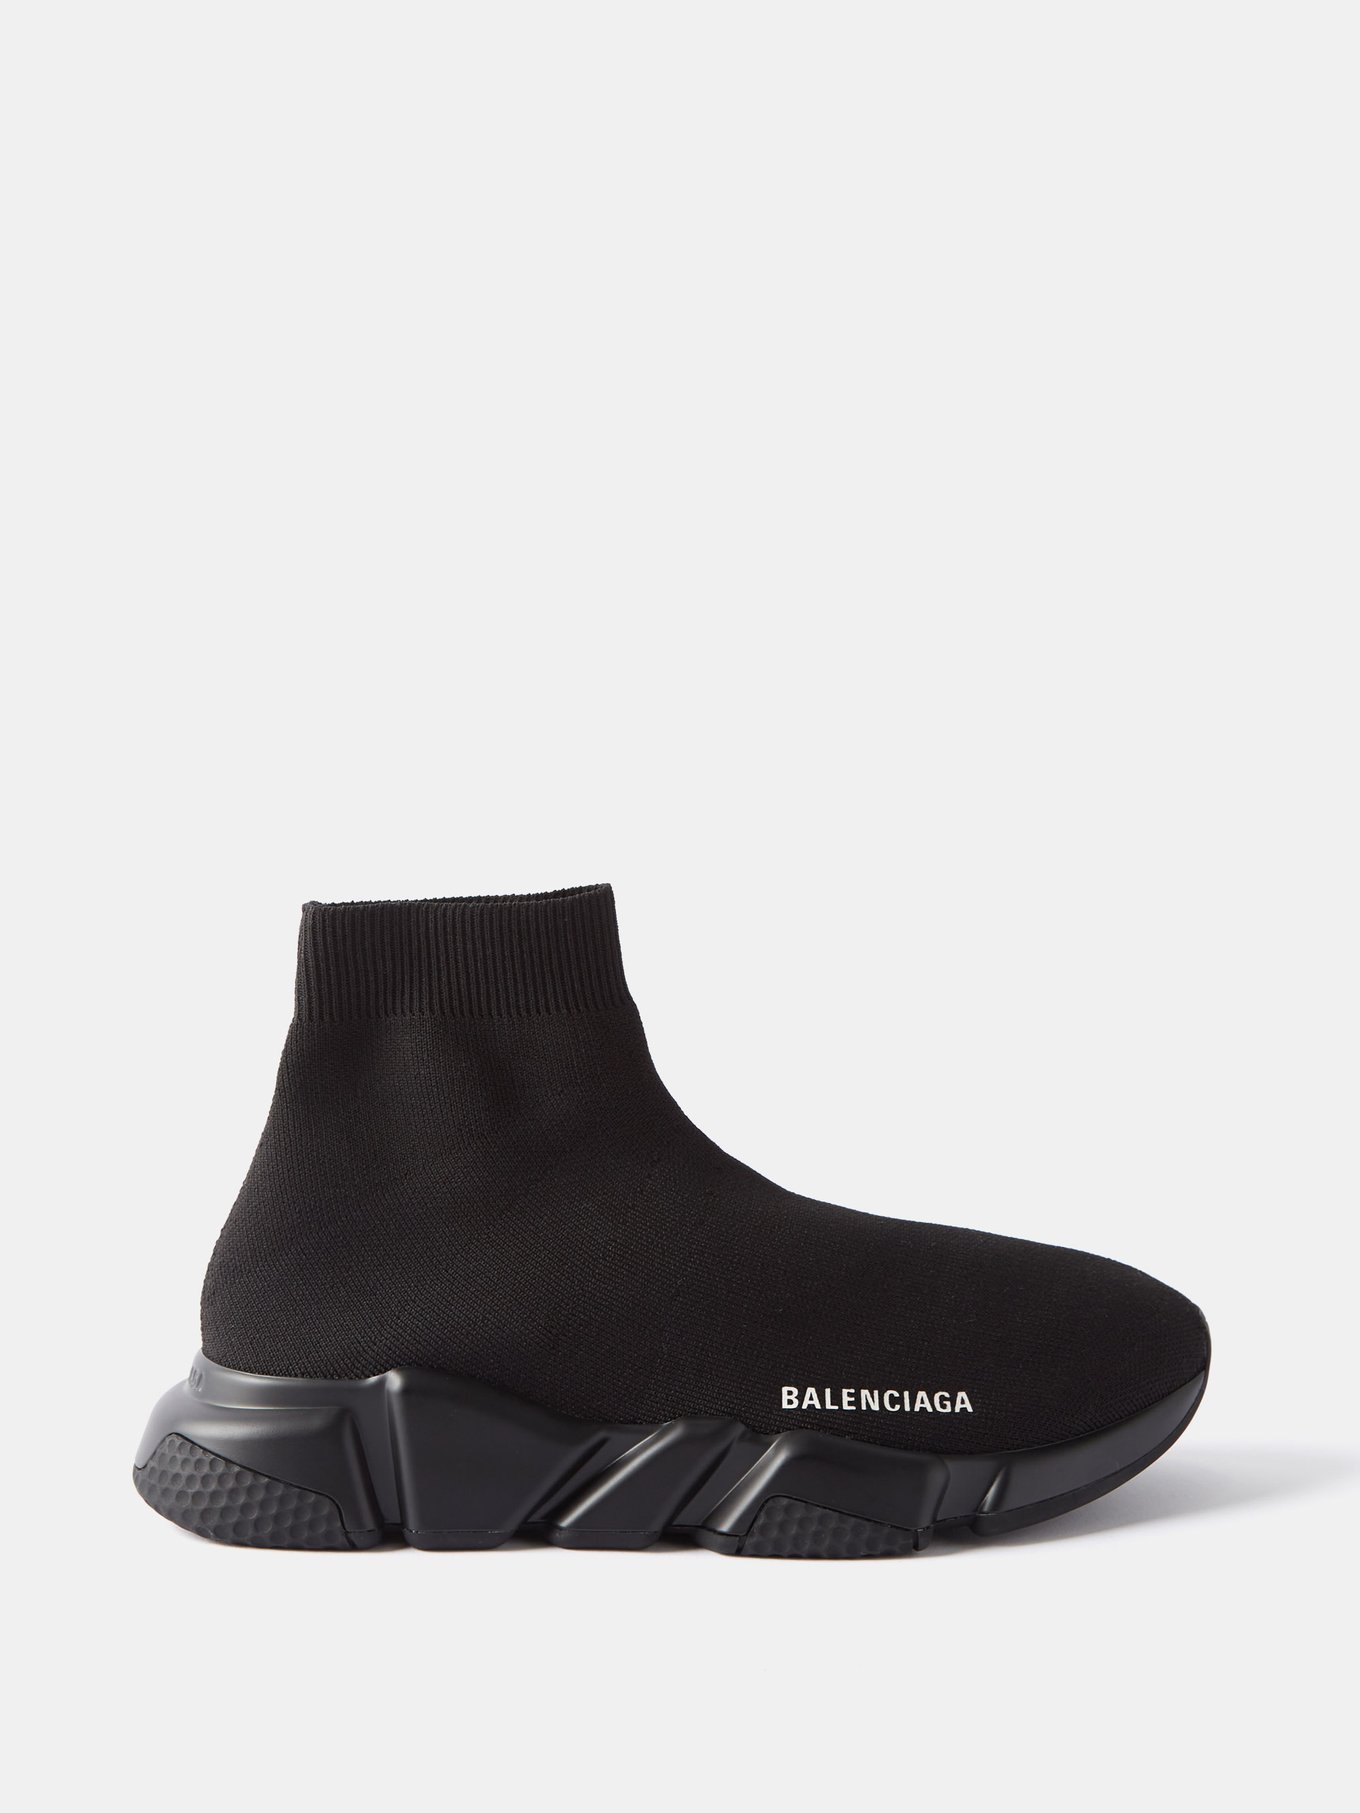 Now Available: Balenciaga Speed Knit Trainer Black/White